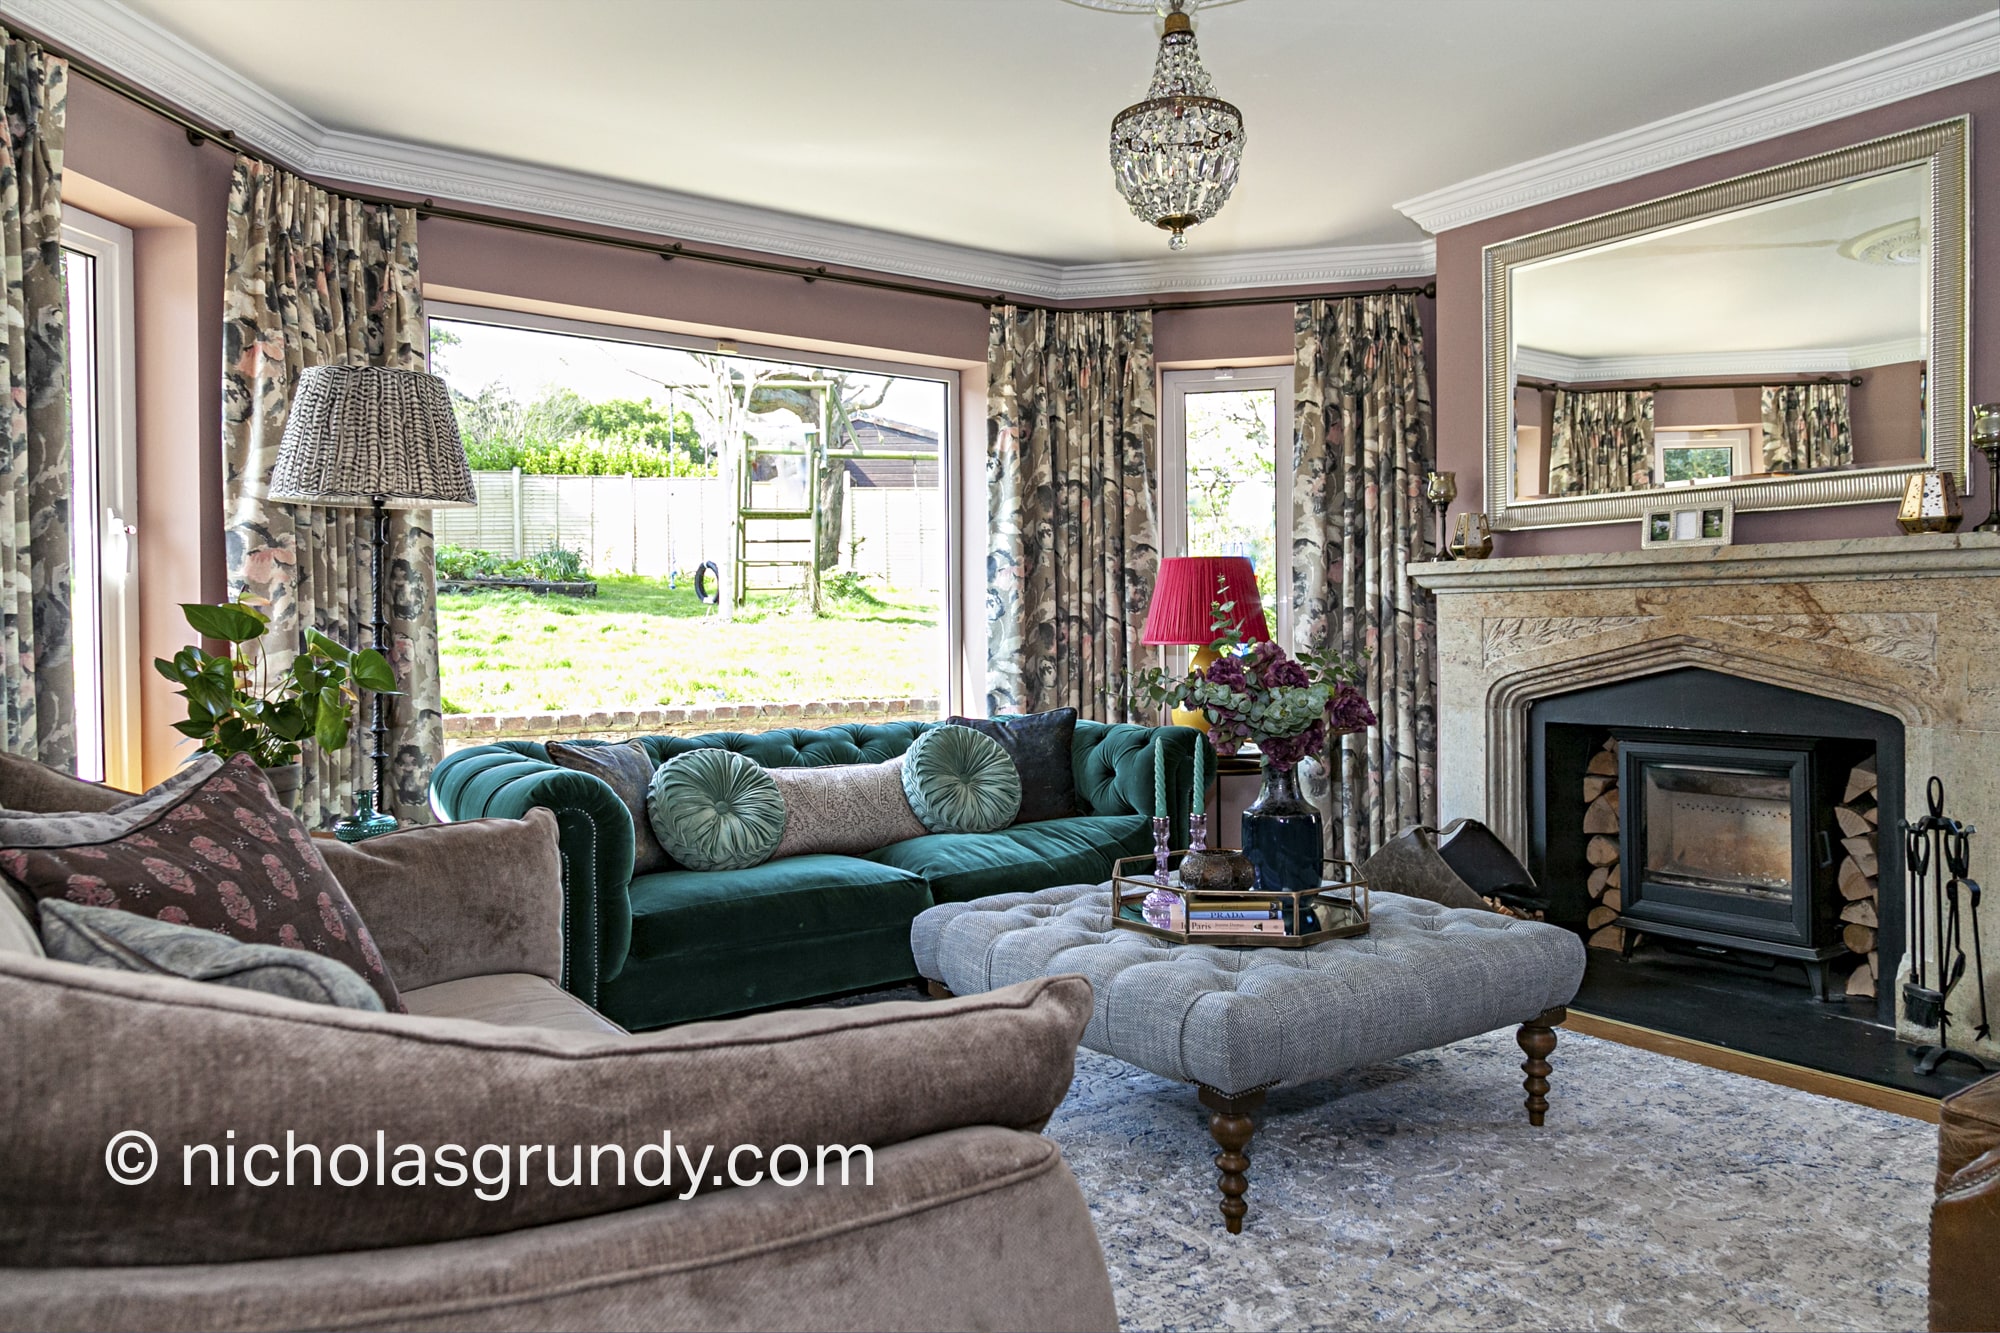 Real Estate Photographer Galway Photo